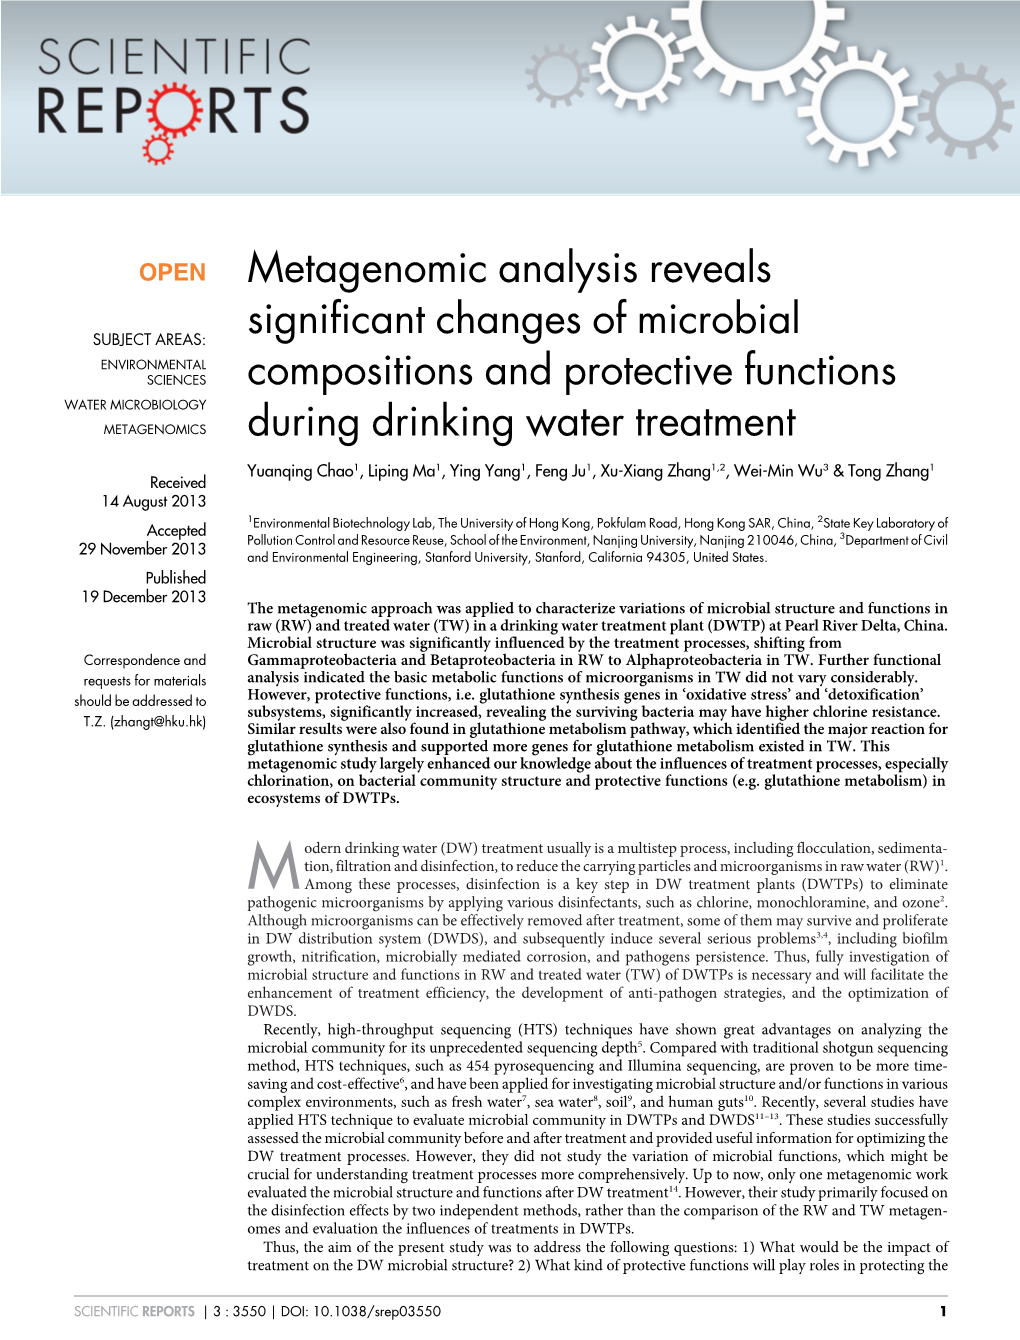 Metagenomic Analysis Reveals Significant Changes of Microbial Compositions and Protective Functions During Drinking Water Treatm